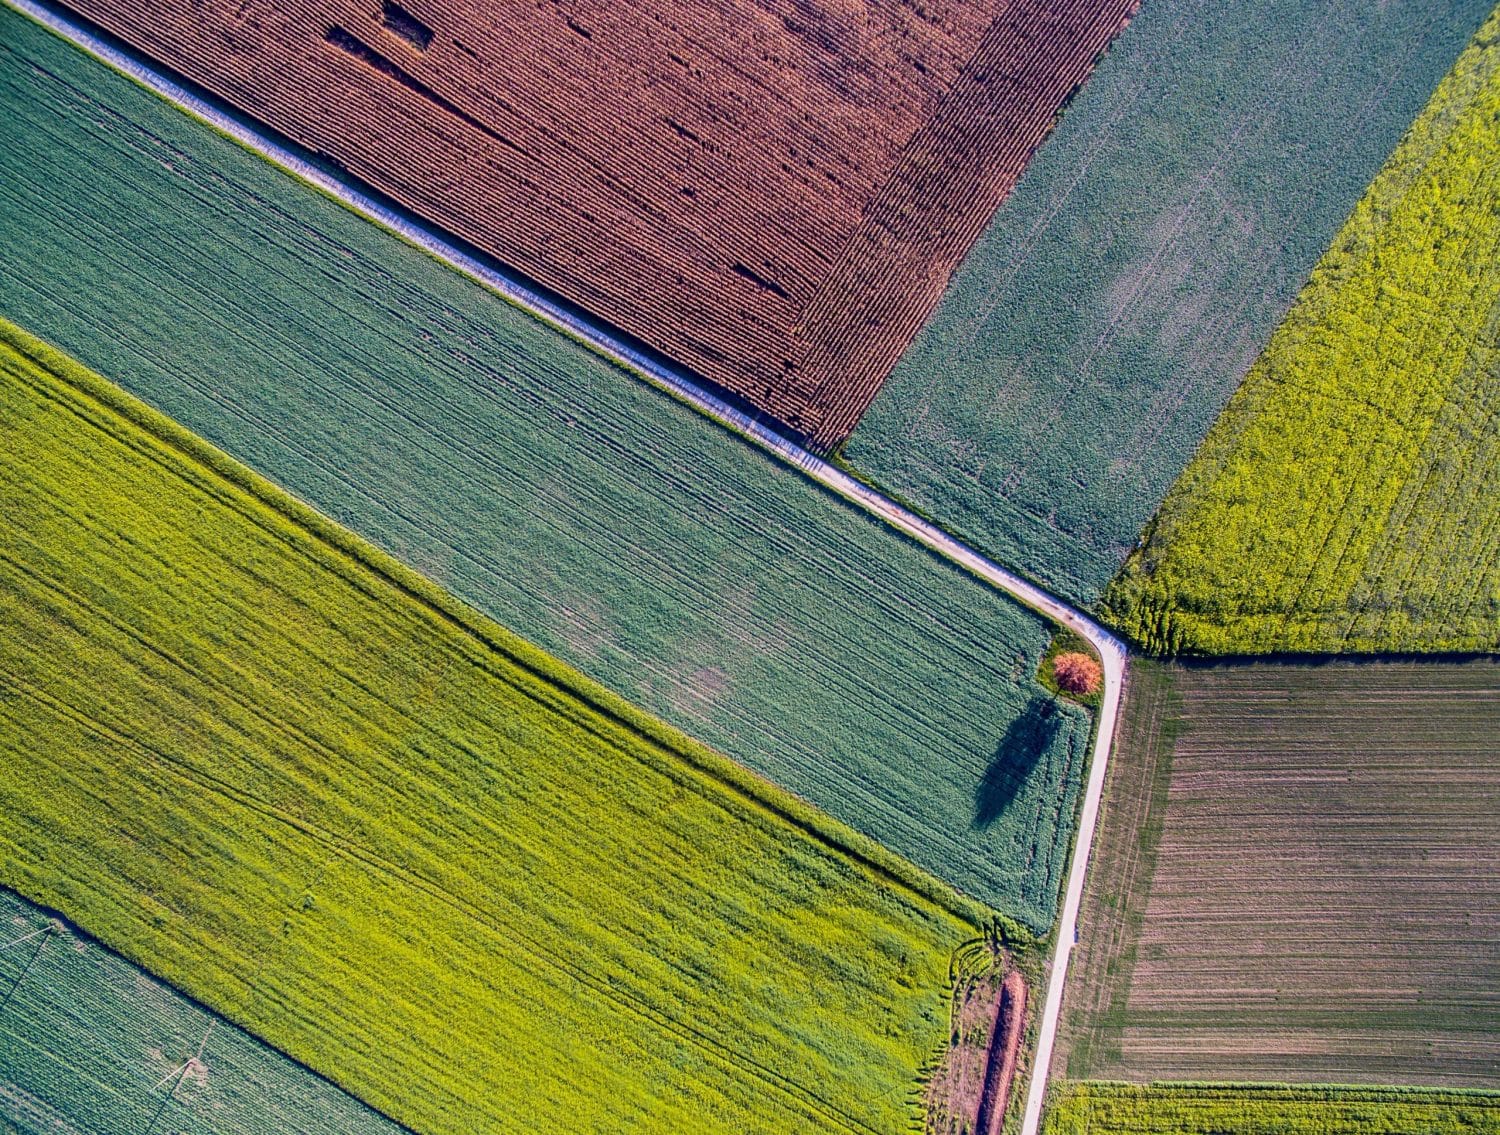 above view of fields